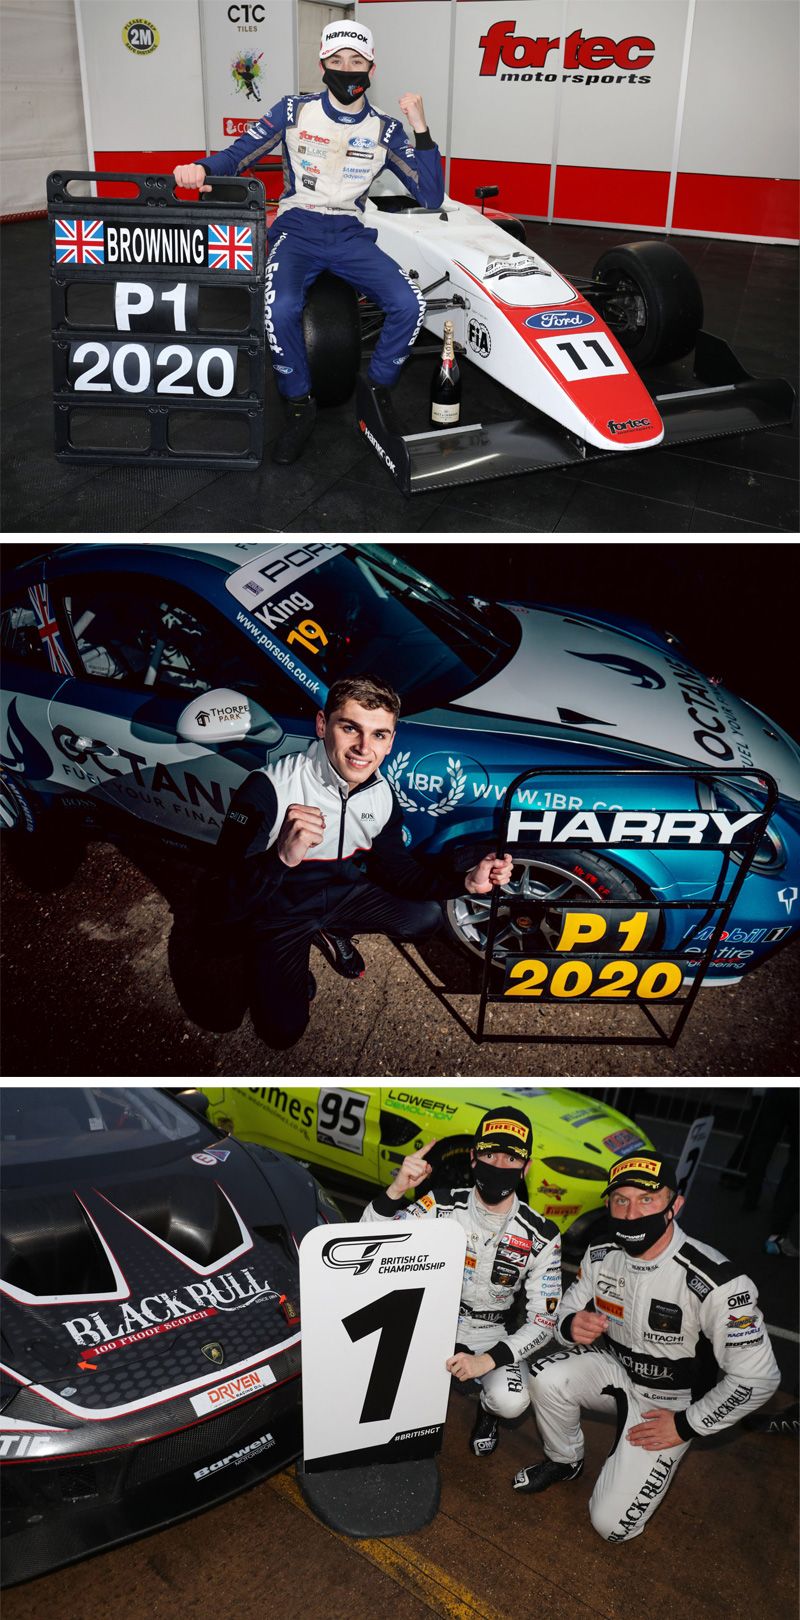 Pictured are Loughborough College Graduates - Luke Browning, Sandy Mitchell, Harry King standing next to their championship winning cars with a pit board sign marking number 1 in 2020 